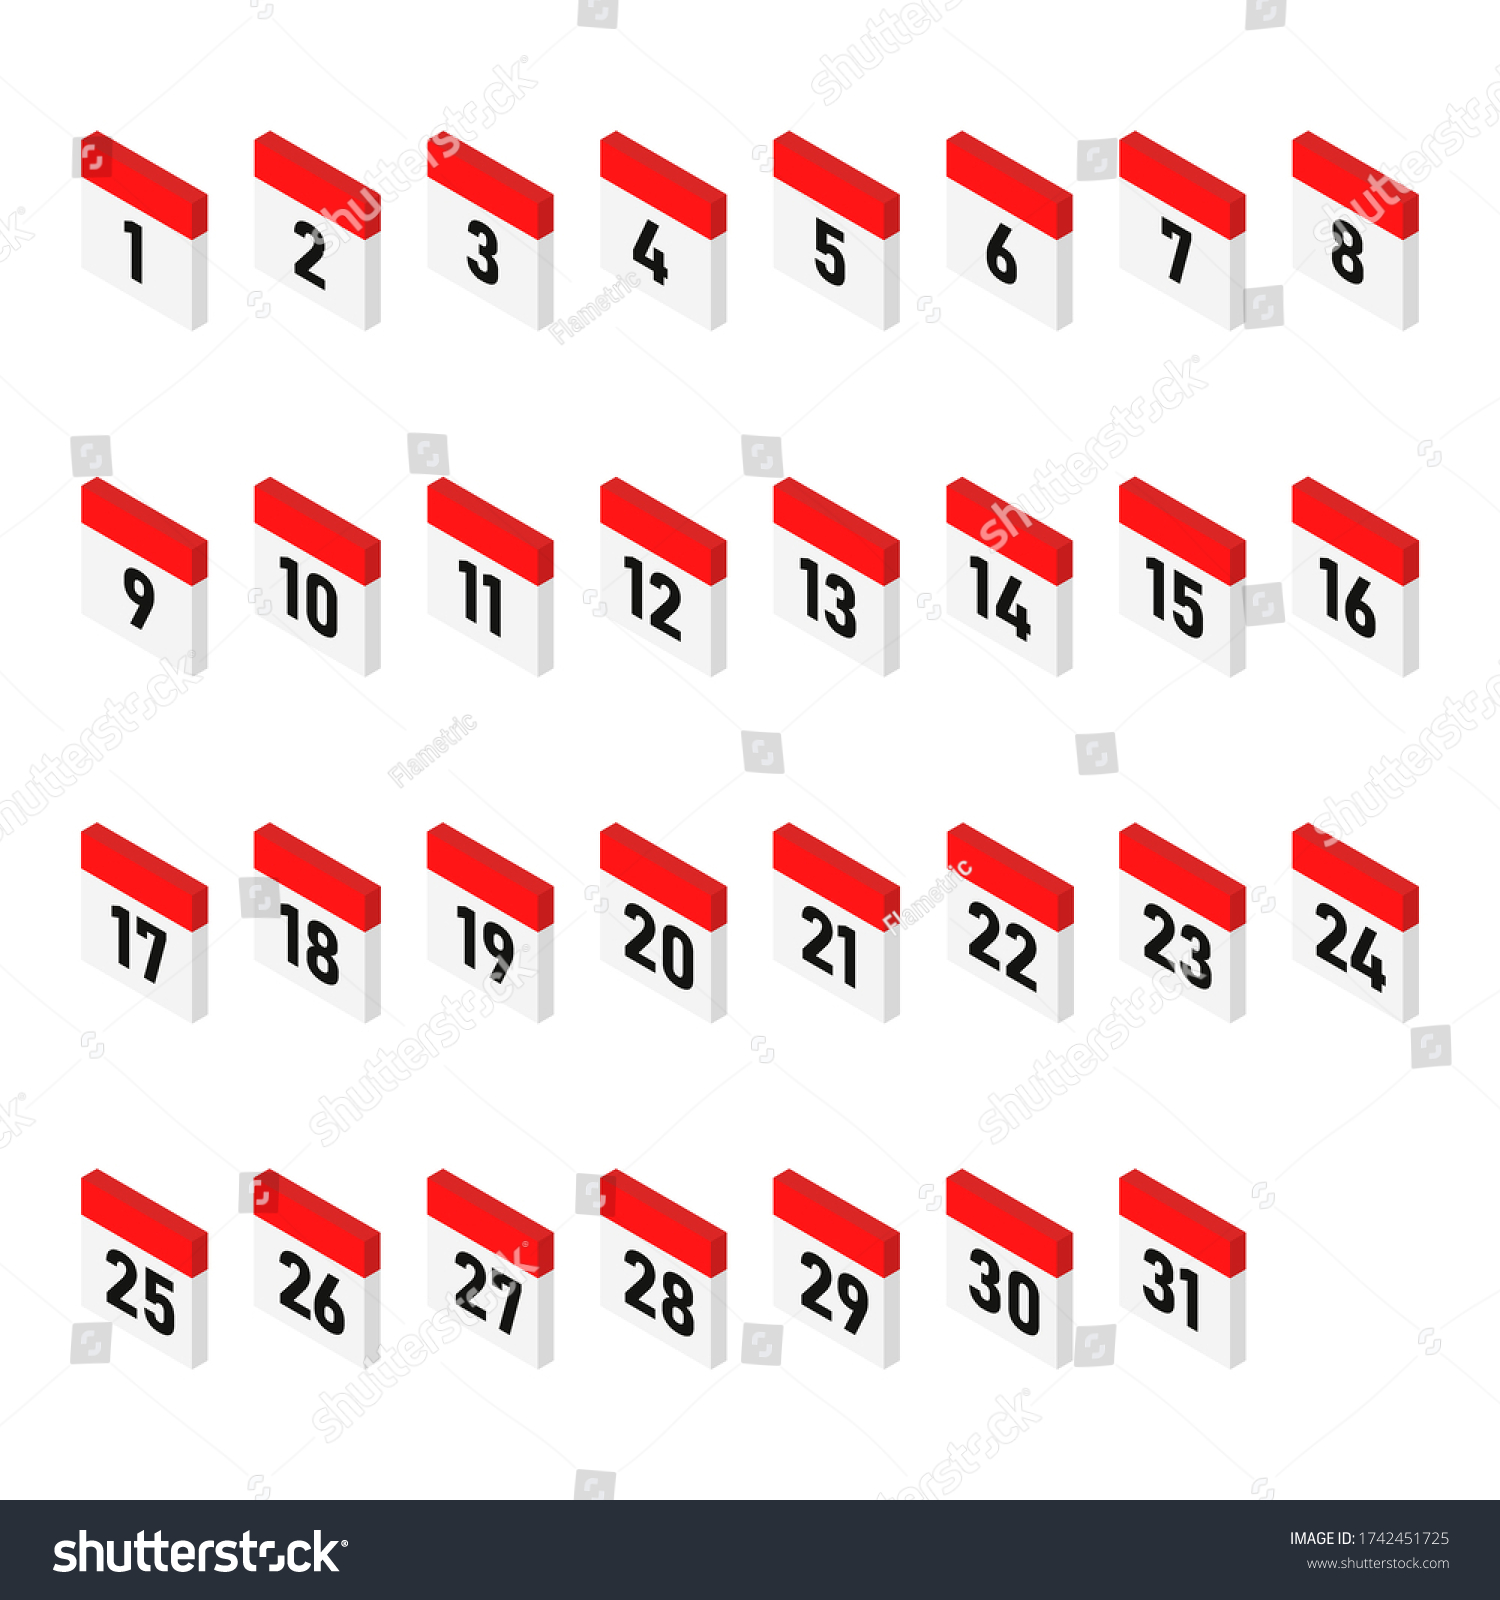 Isometric Calendar Days Icons 1 31 Stock Vector (Royalty Free) 1742451725